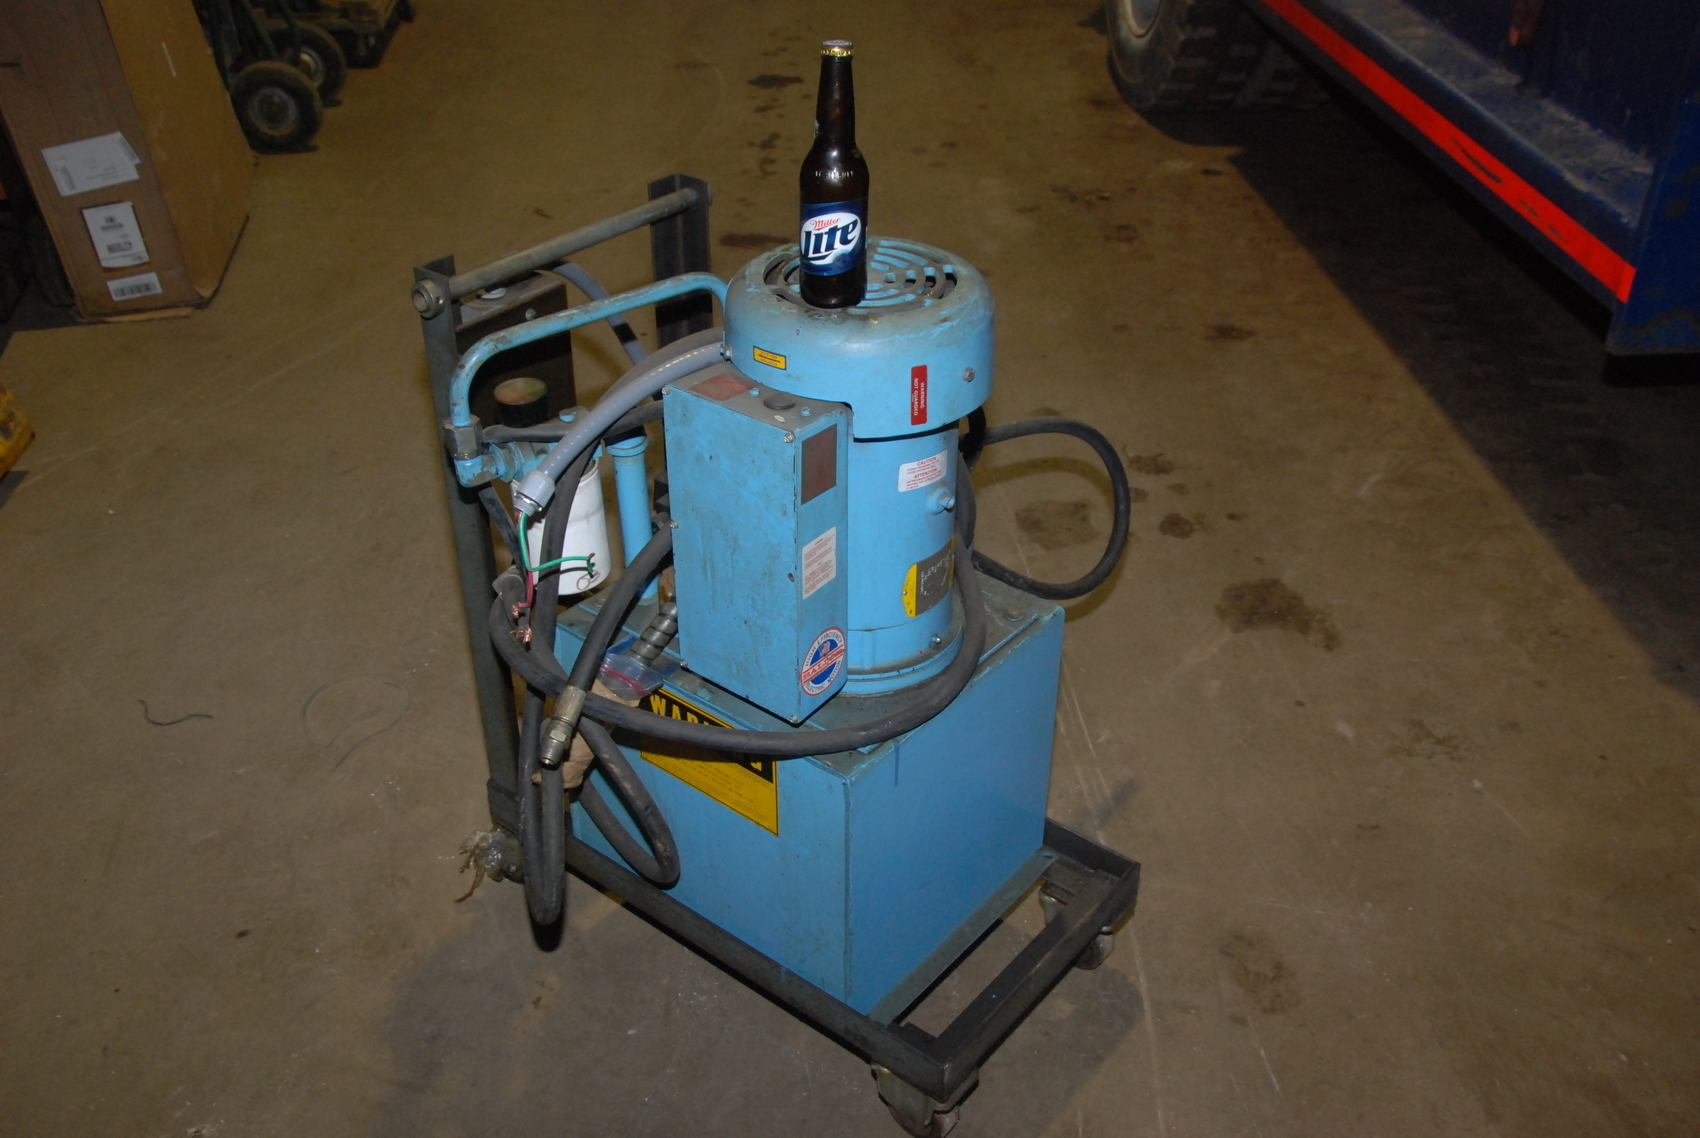 SINGLE PHASE 5 HP Hydraulic Unit on casters